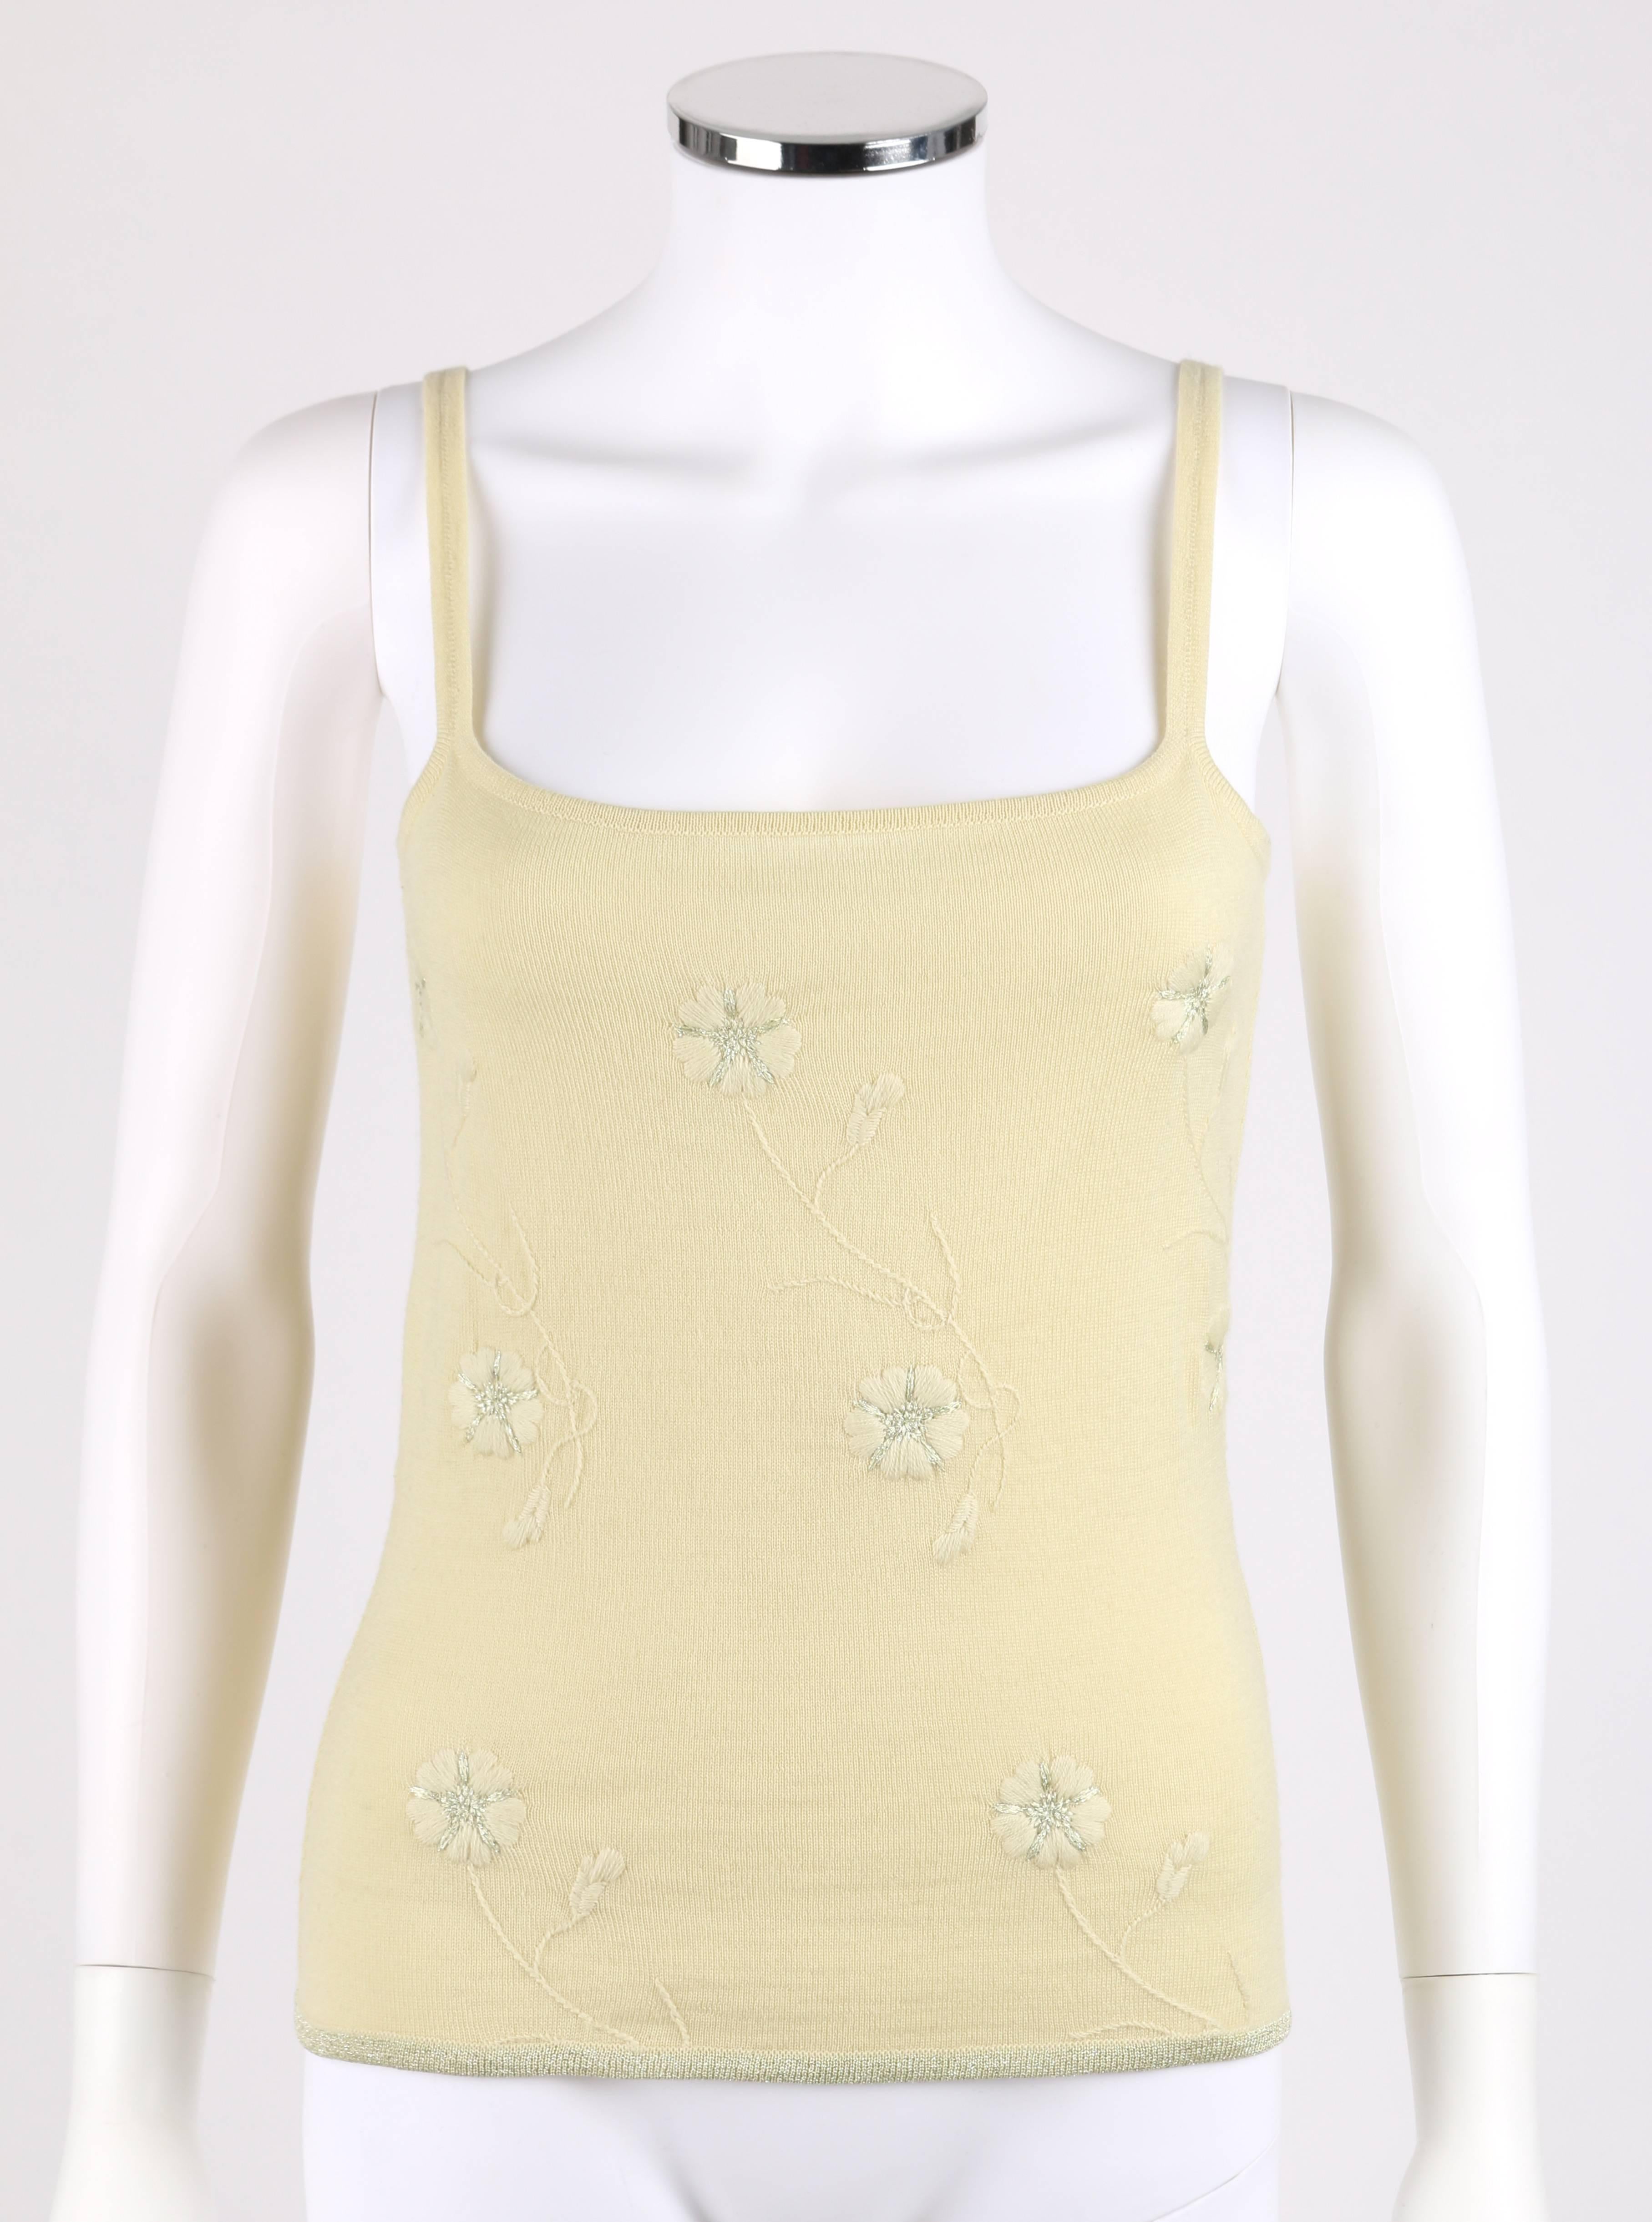 Women's GIVENCHY Couture S/S 1998 ALEXANDER MCQUEEN Pale Yellow Floral Cardigan Top Set For Sale